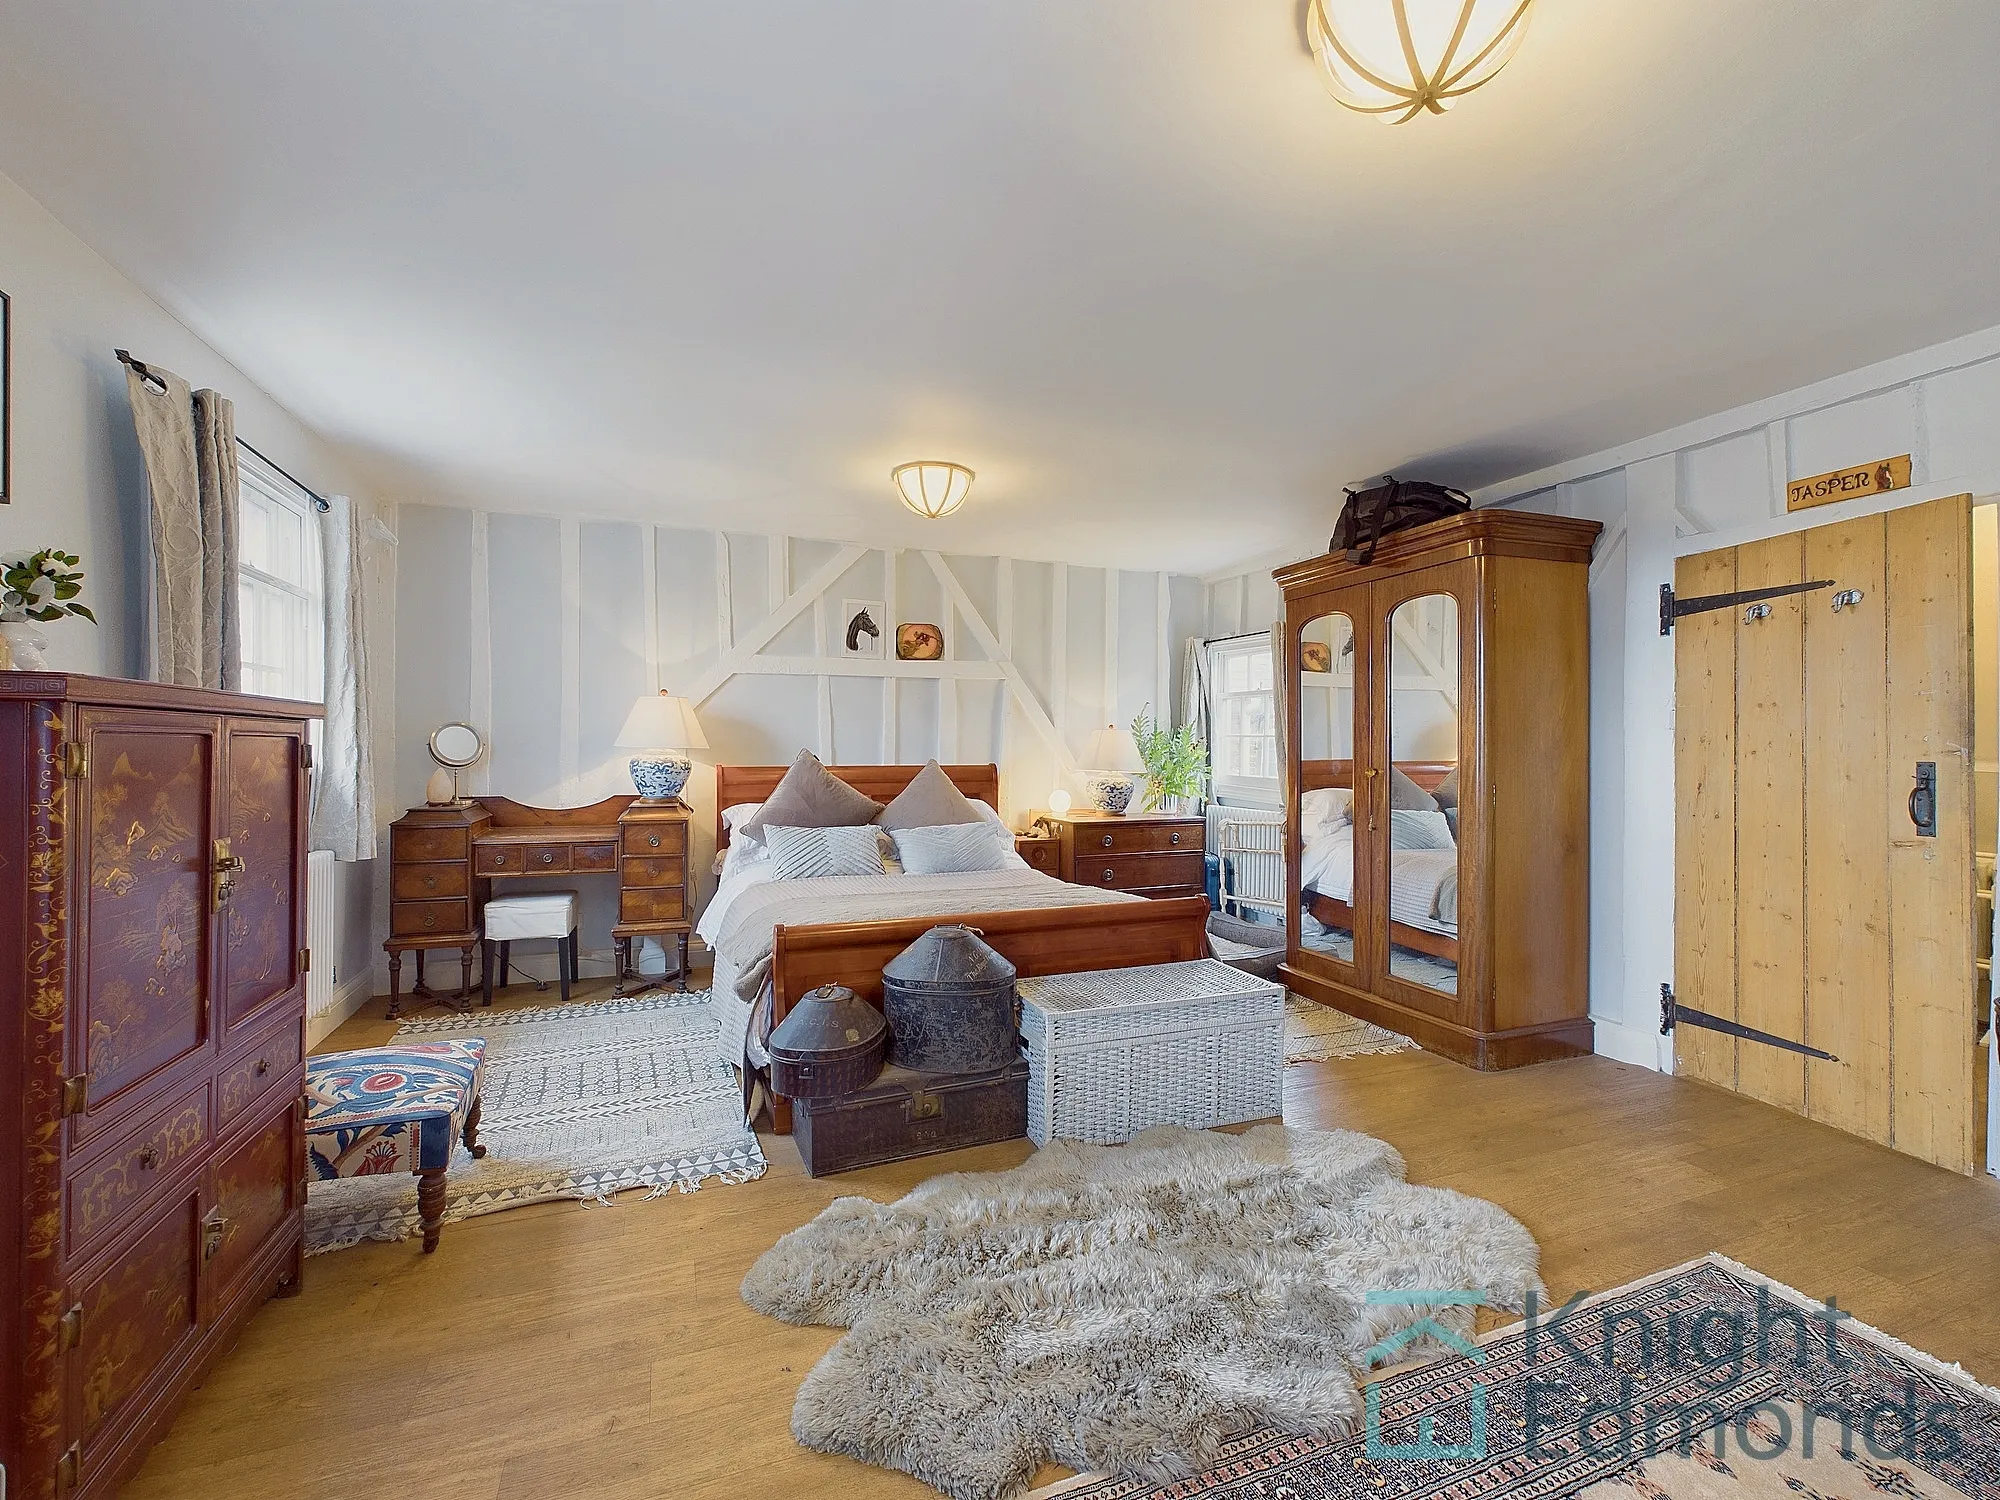 3 bed mid-terraced house for sale in Tonbridge Road, Maidstone - Property Image 1